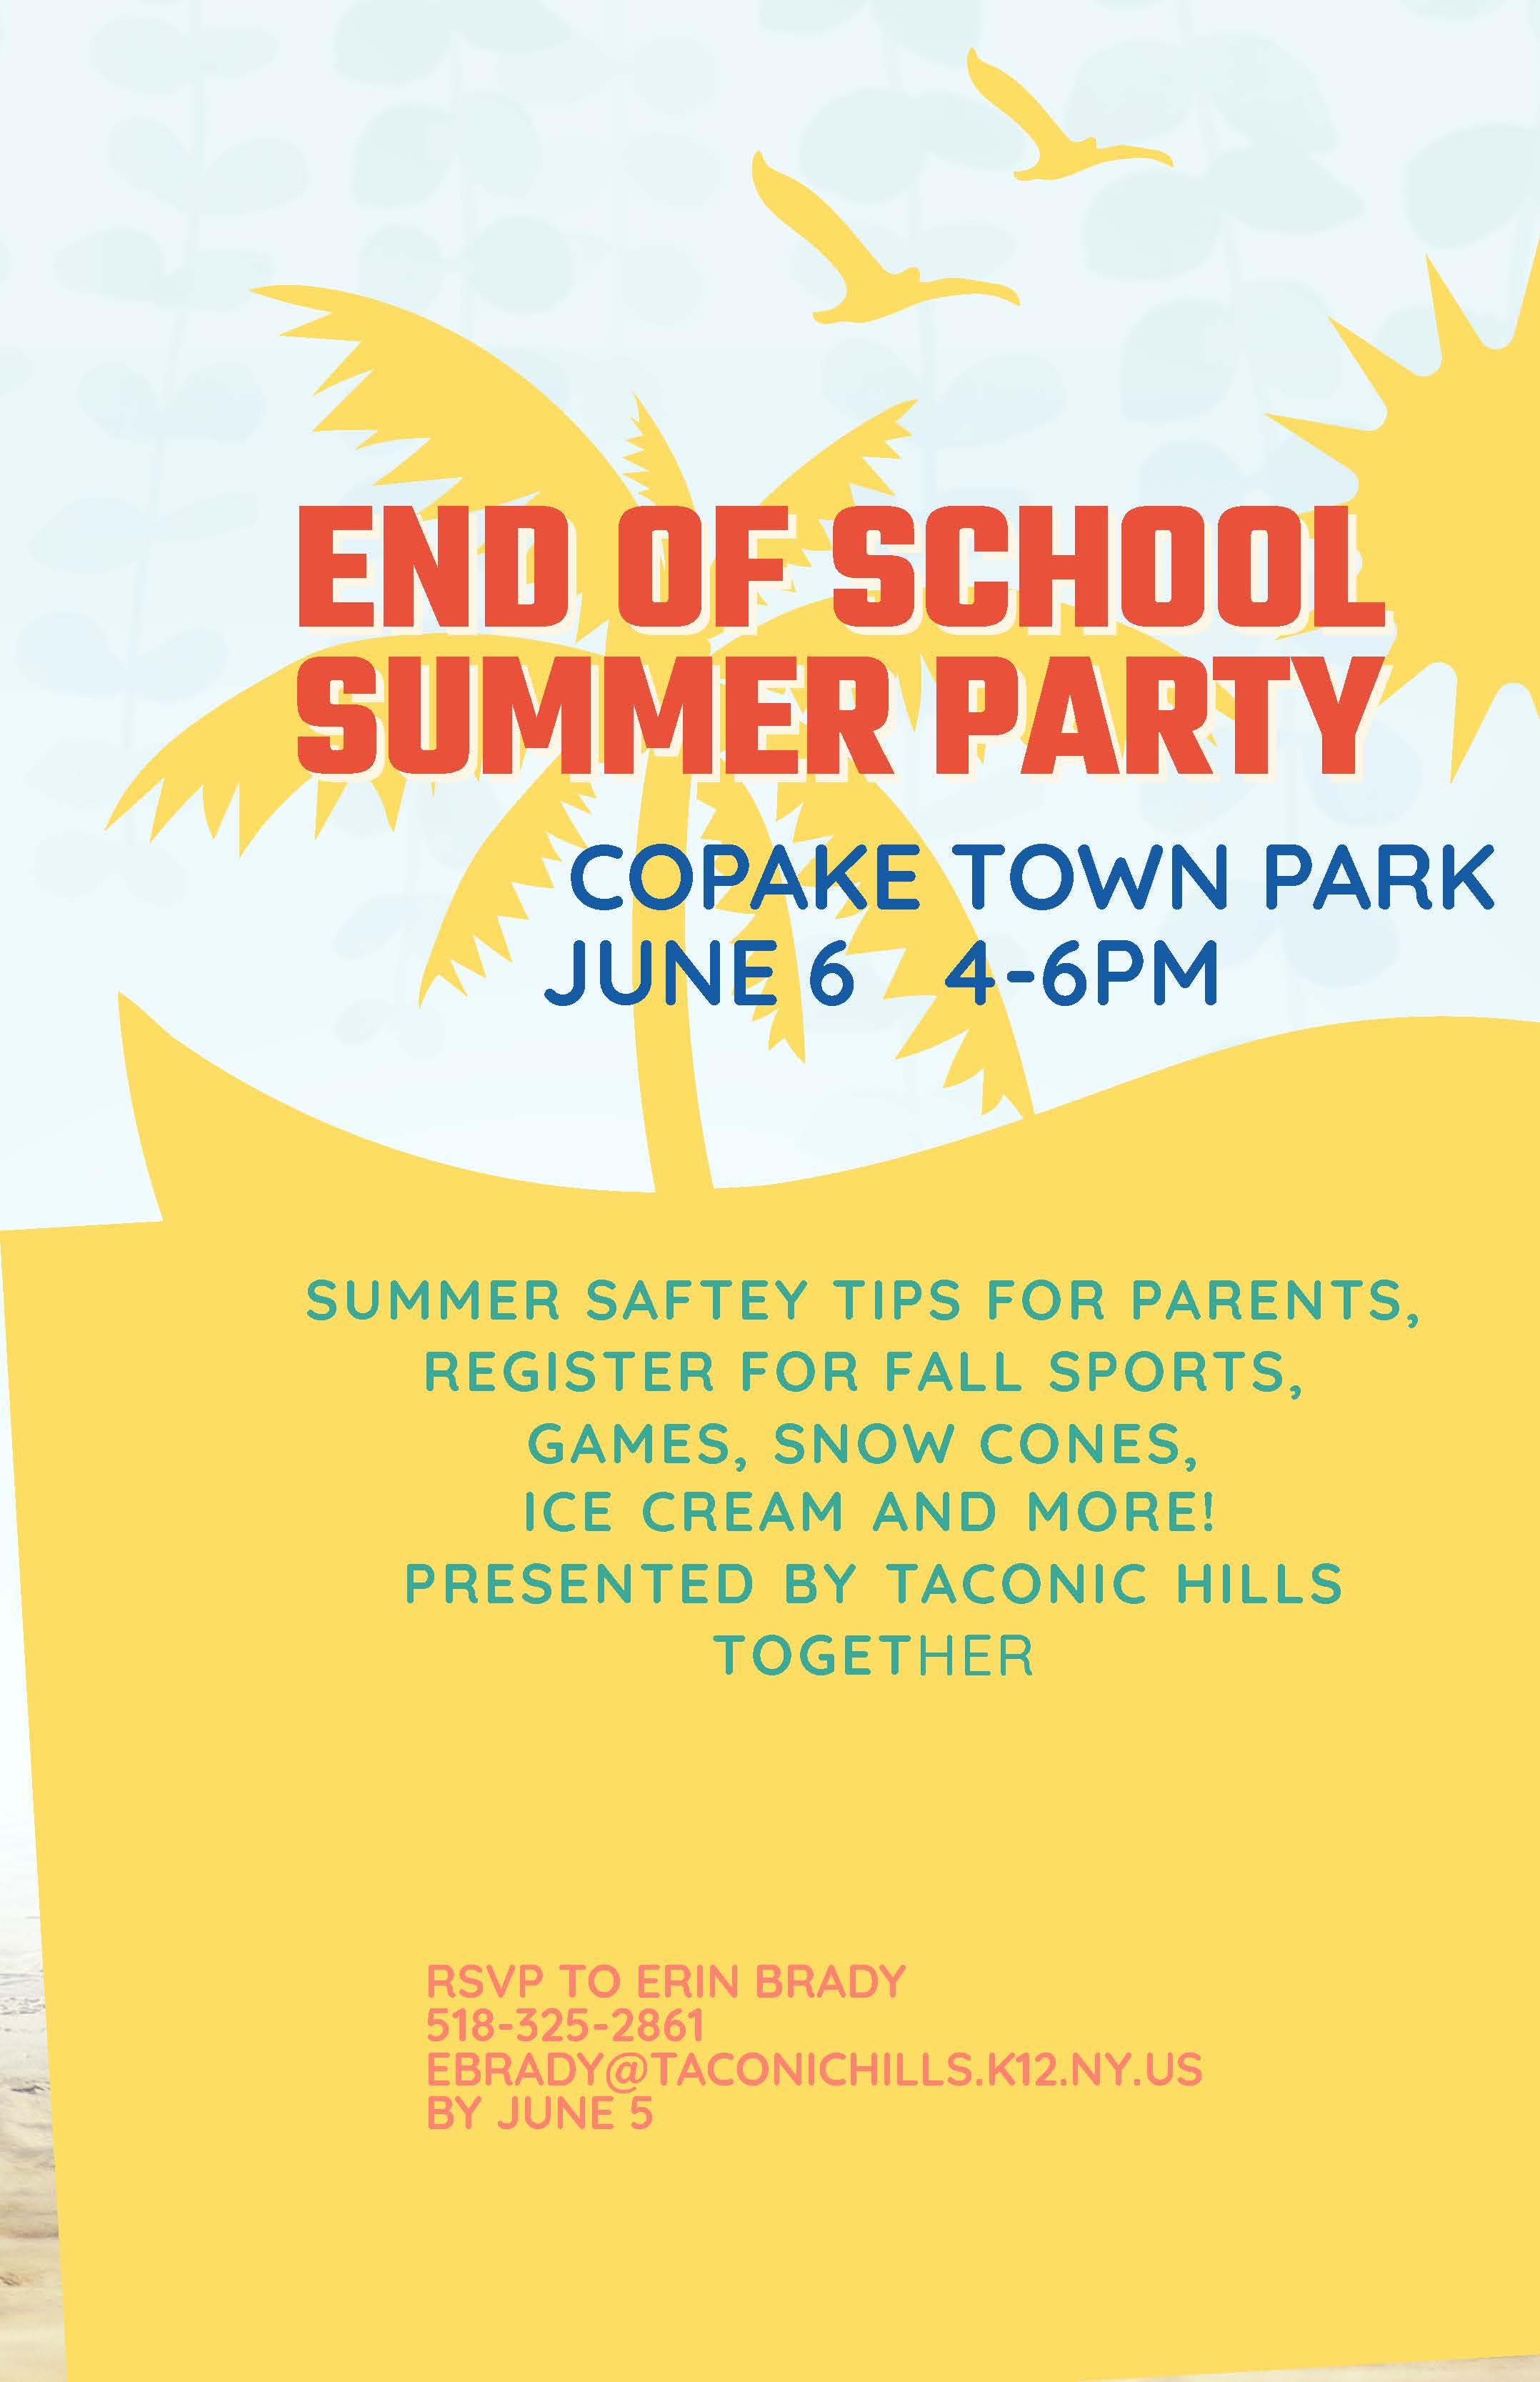 End of School Summer Party